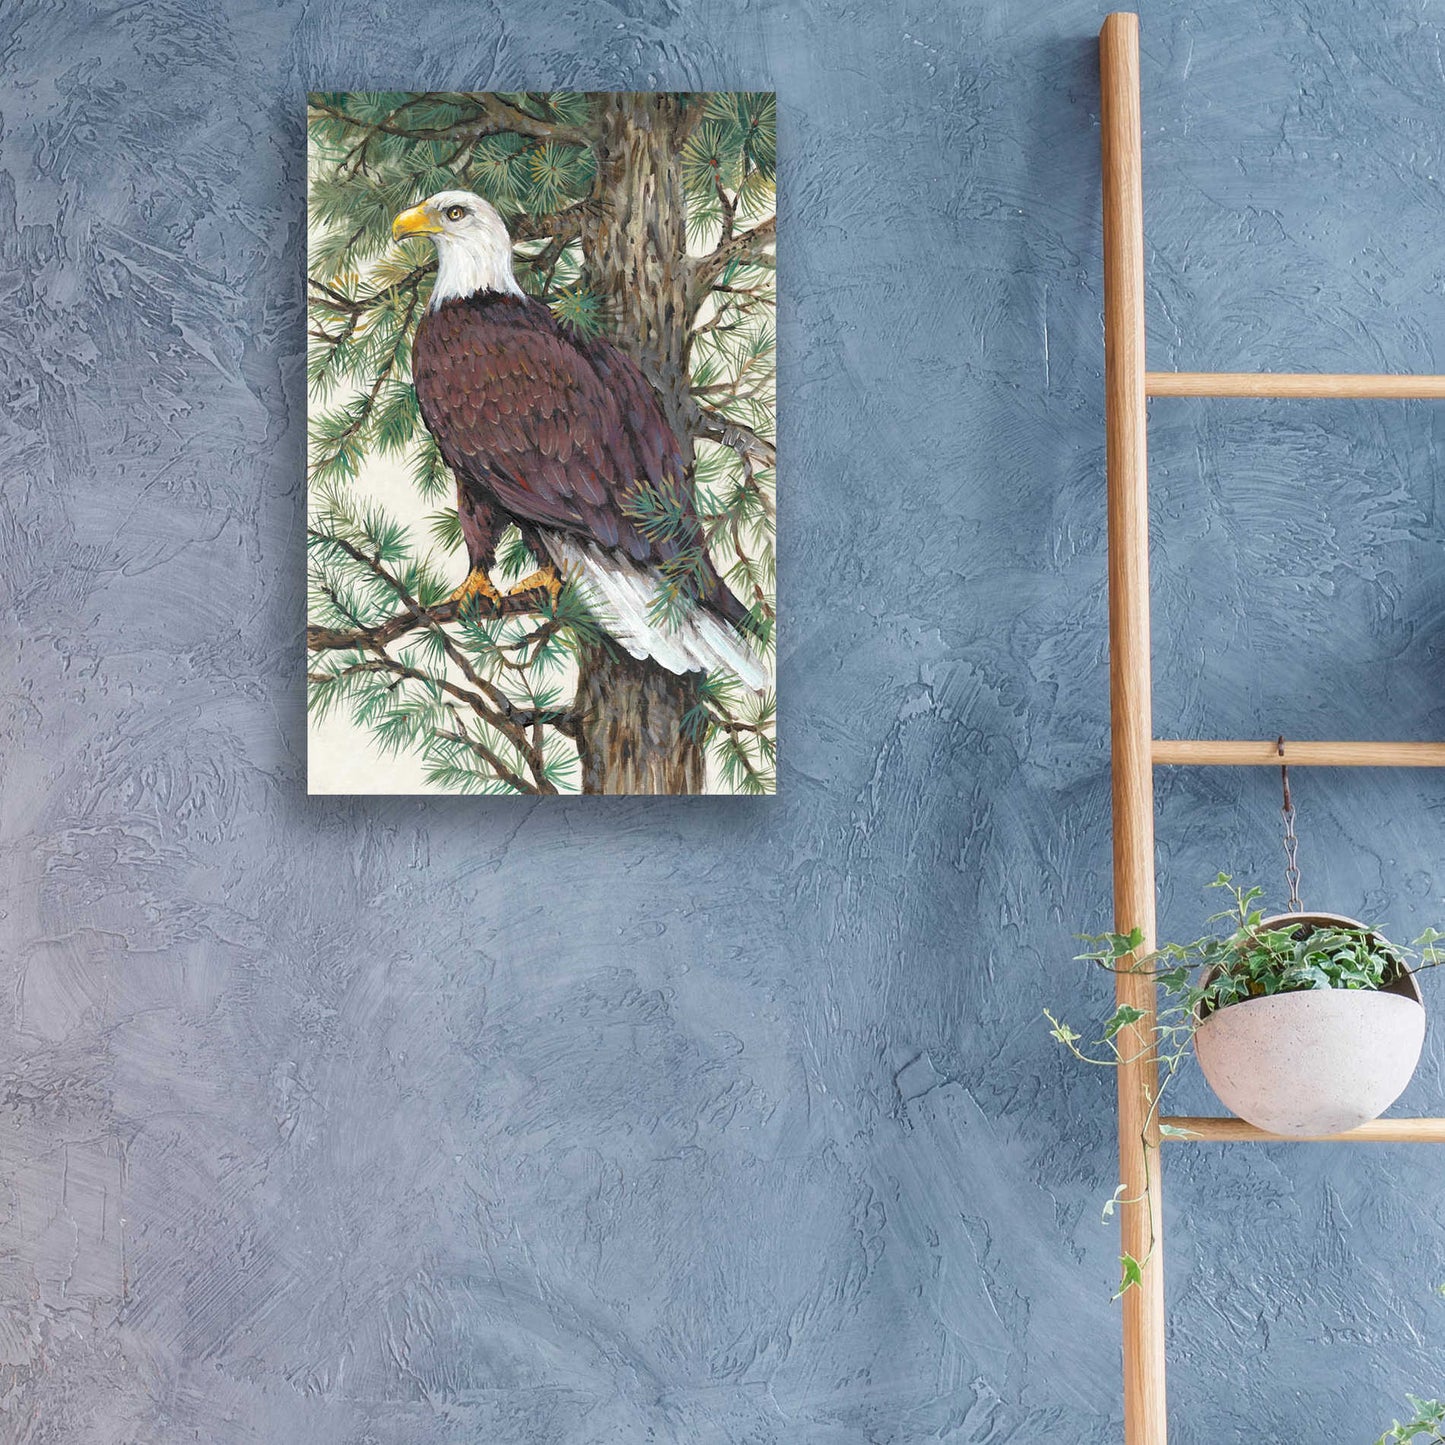 Epic Art 'Eagle in the Pine' by Tim O'Toole, Acrylic Glass Wall Art,16x24